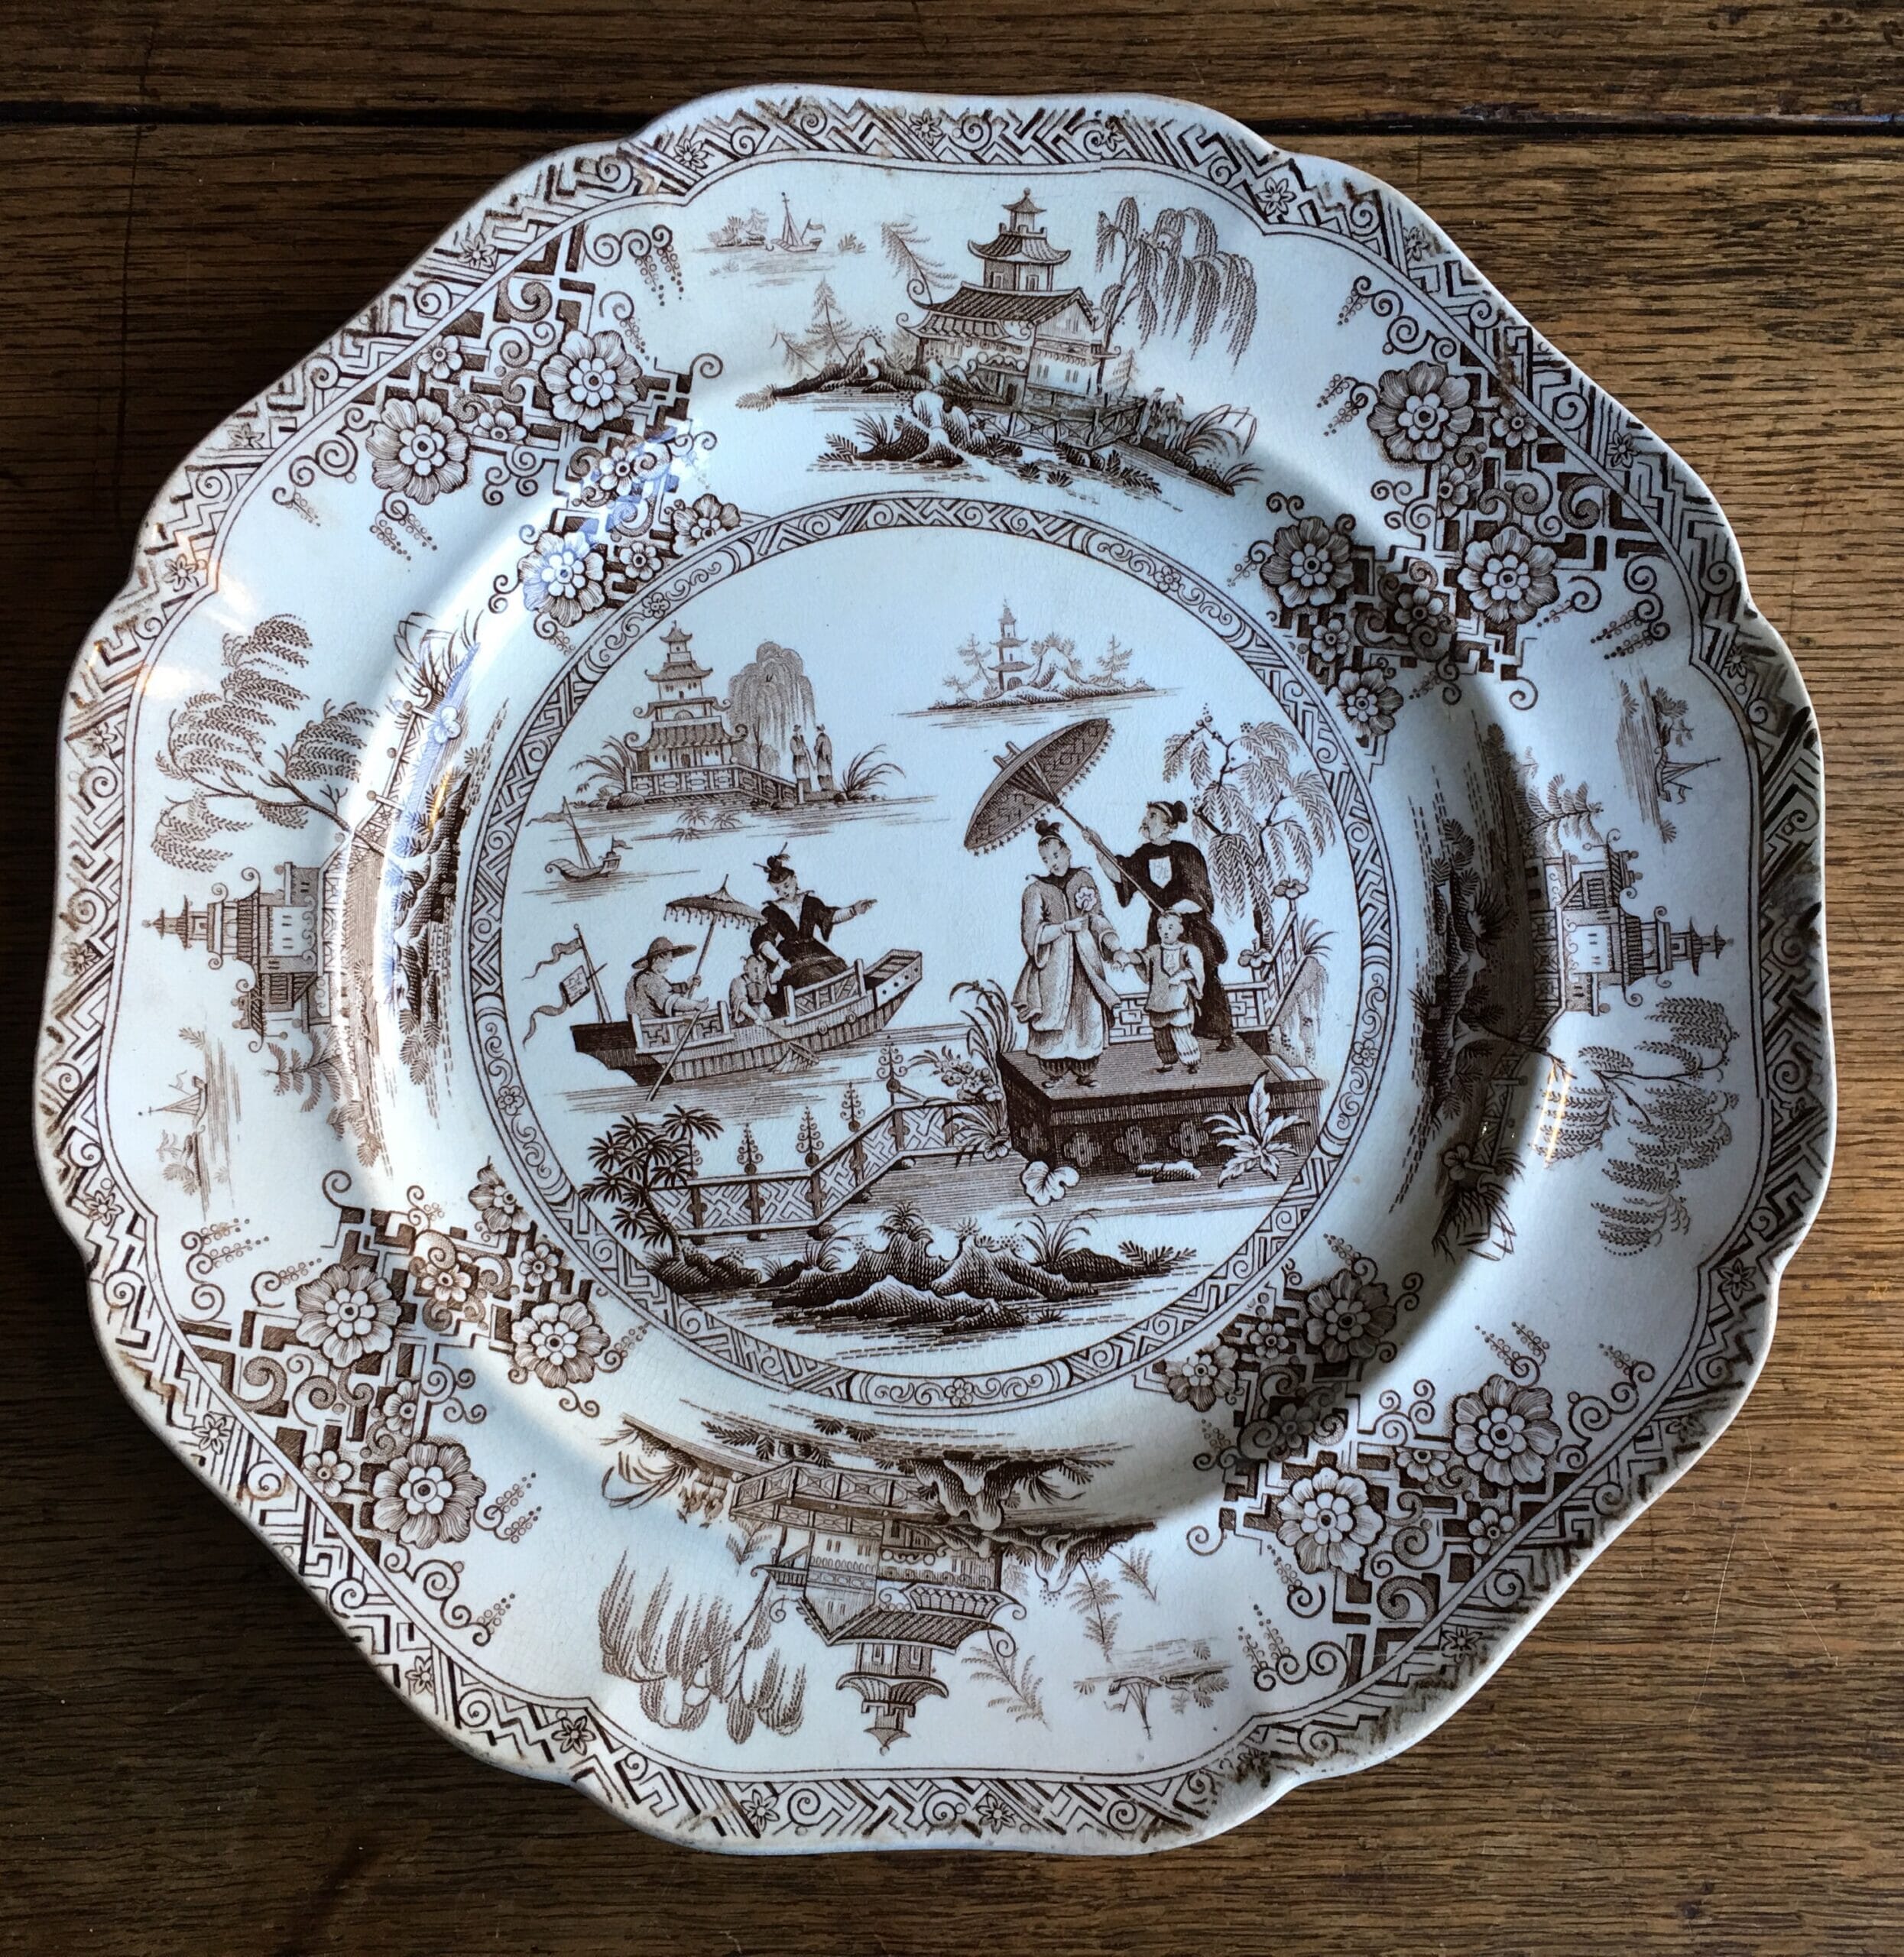 Ridgway pottery plate, brown 'Napier' pattern chinoiserie, c. 1840-0